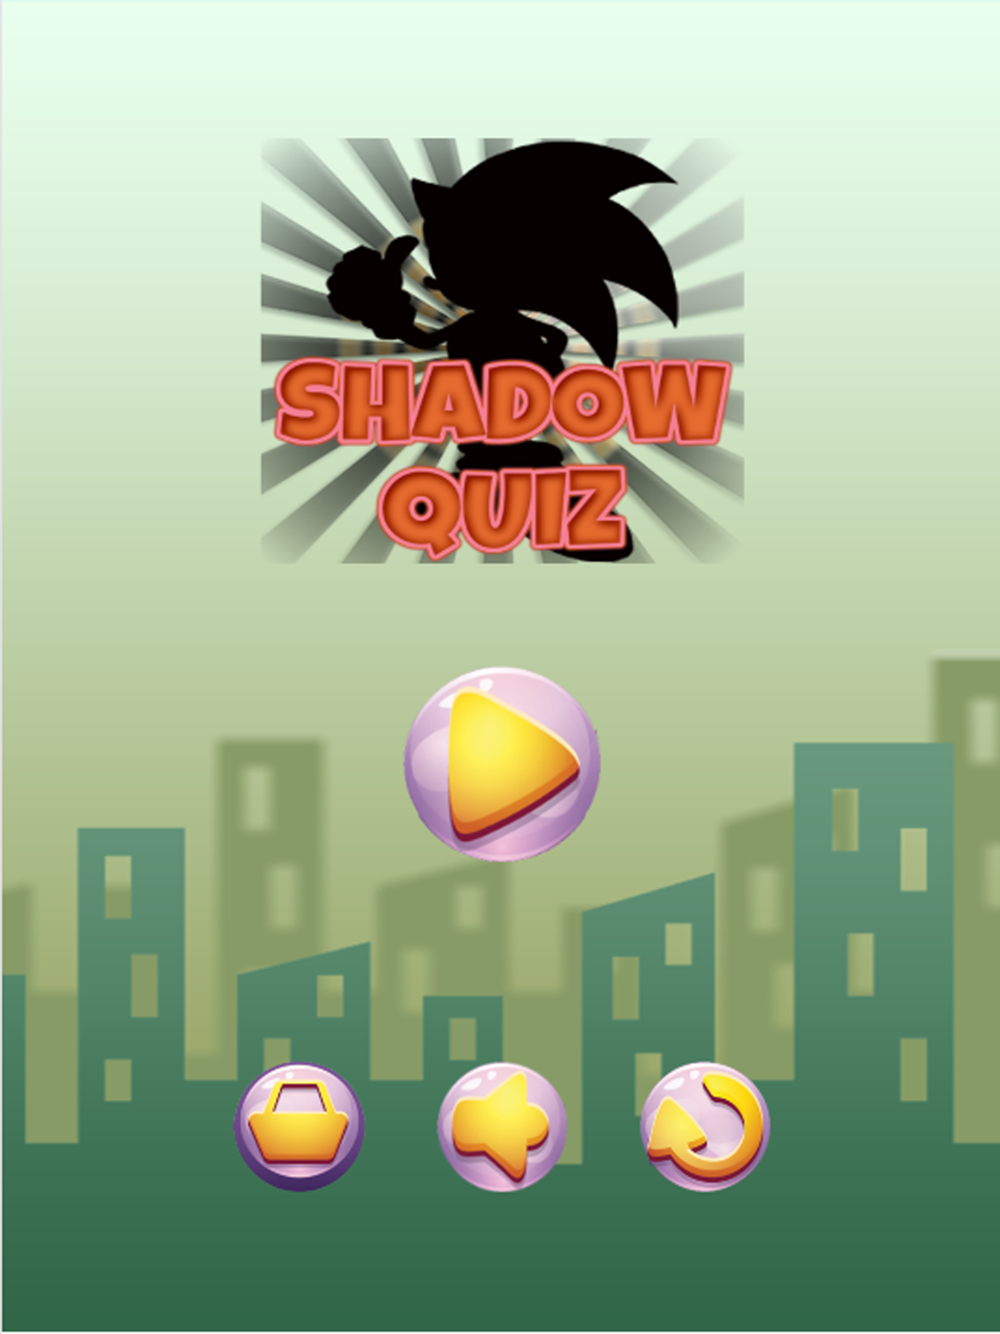 Anime Manga and Cartoon Character Shadow Quiz - Guess The Popular Super Hero, Classic and People Picture from TV Show, Channel Film Free Download App for iPhone -